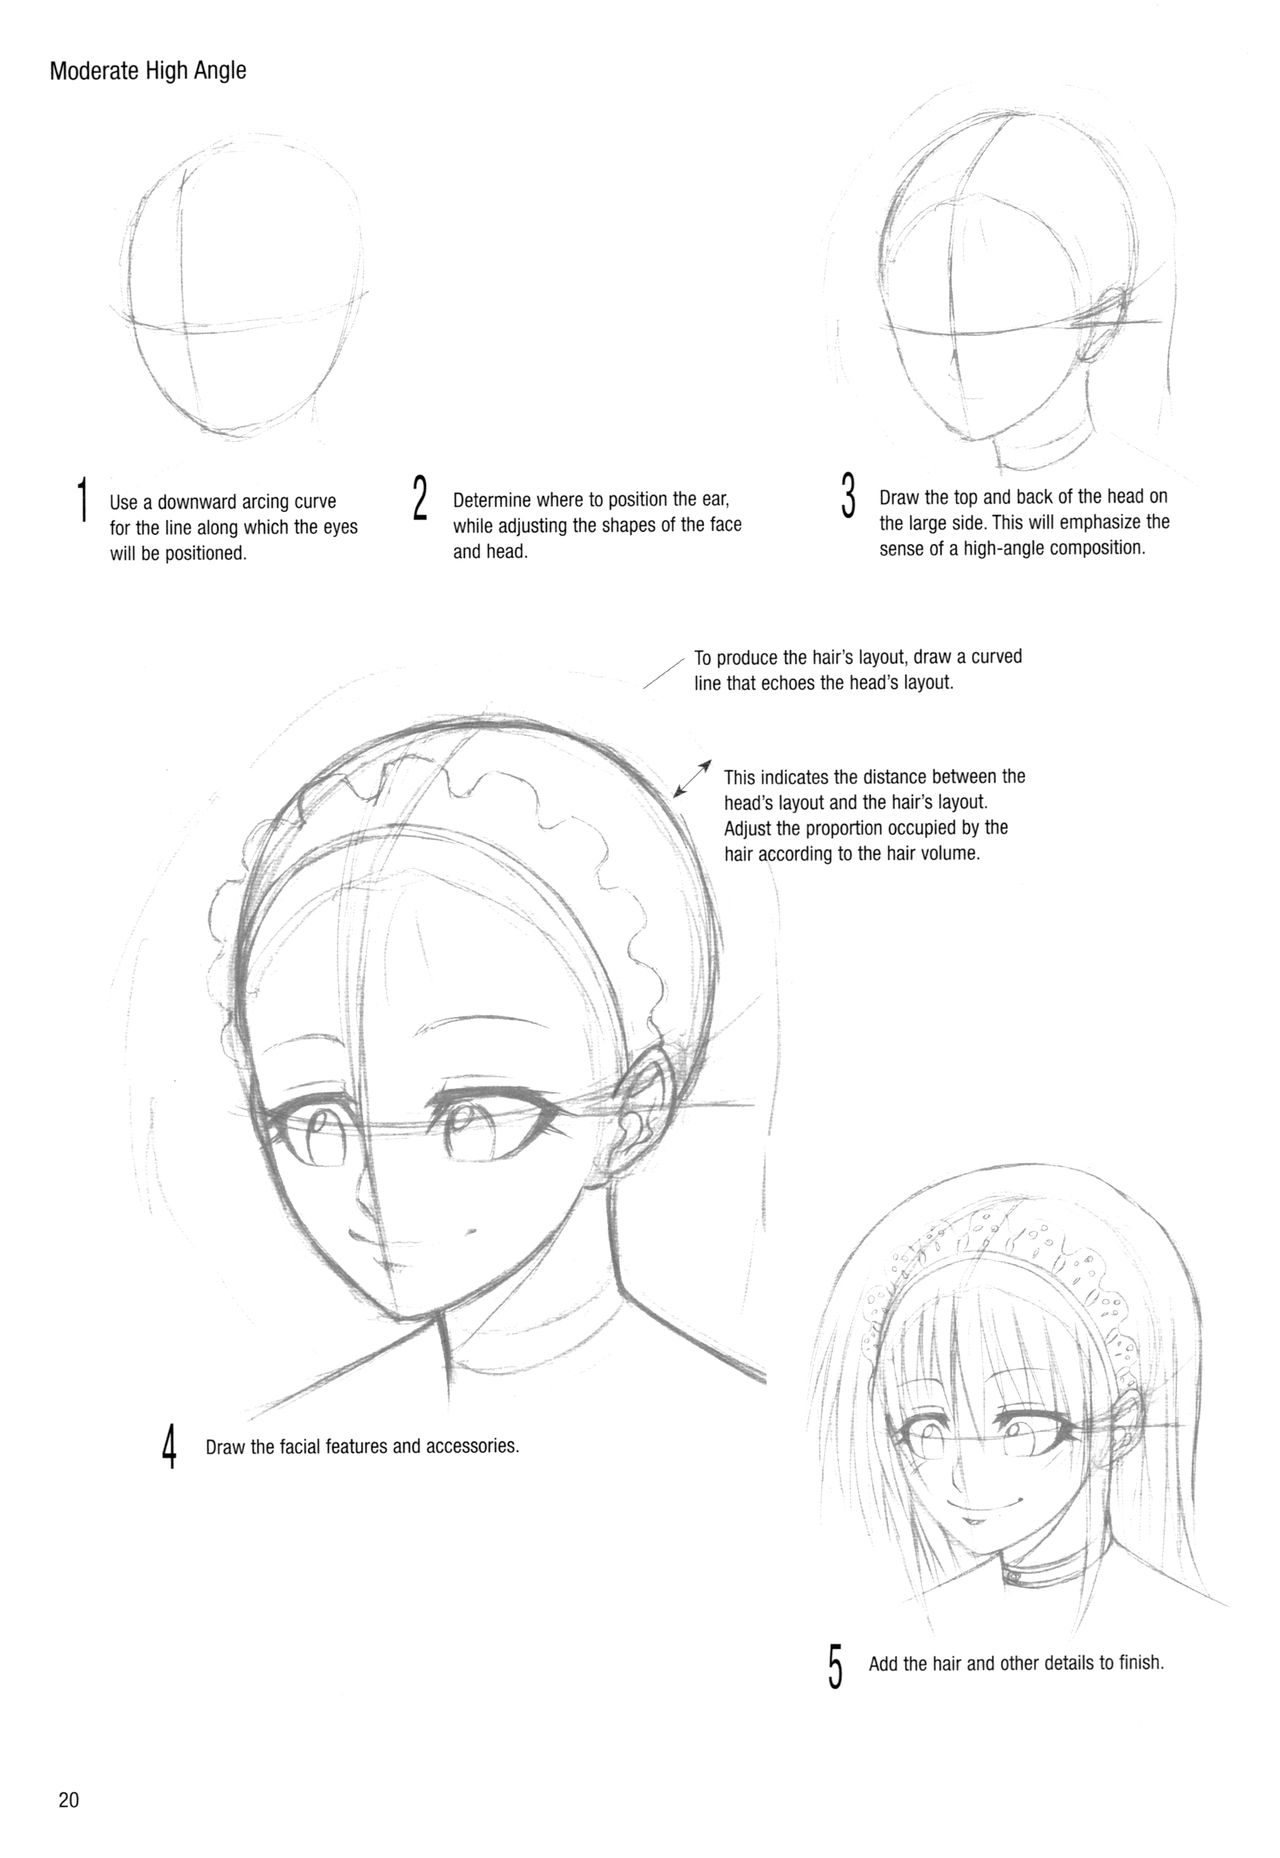 Sketching Manga-Style Vol. 3 - Unforgettable Characters 19